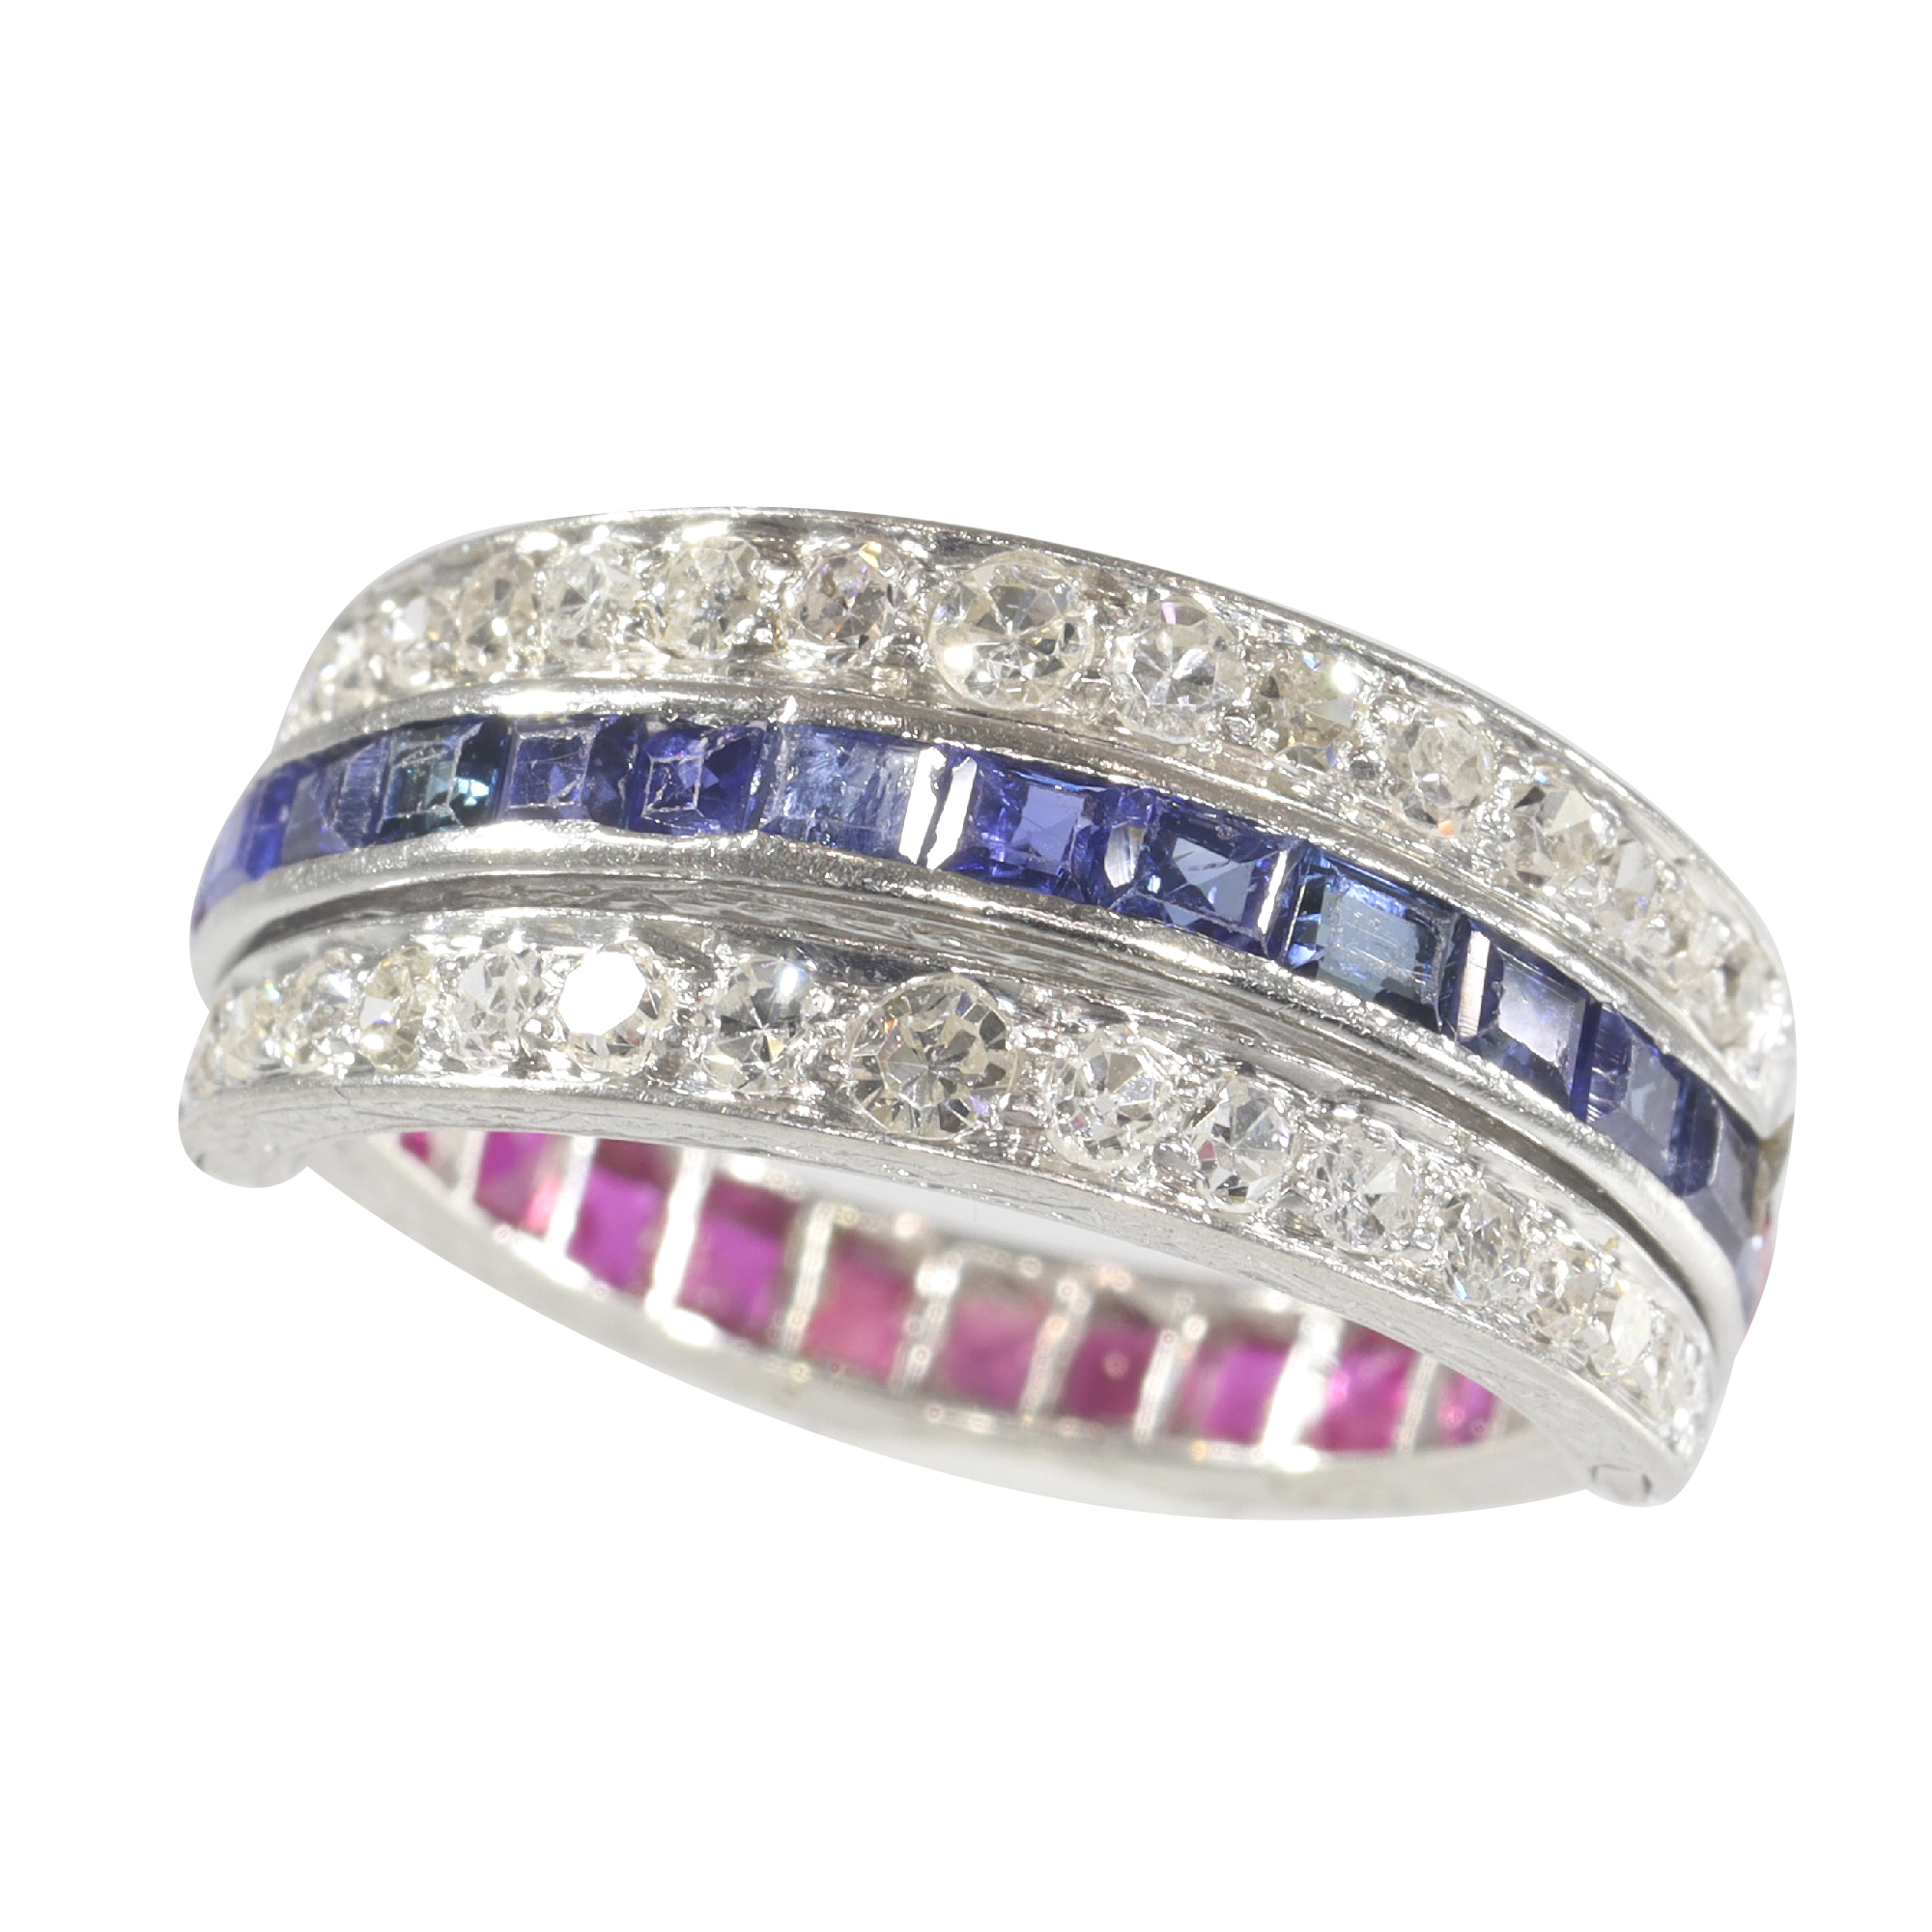 The Transformative Eternity Band: A 1950s Gemstone Masterpiece